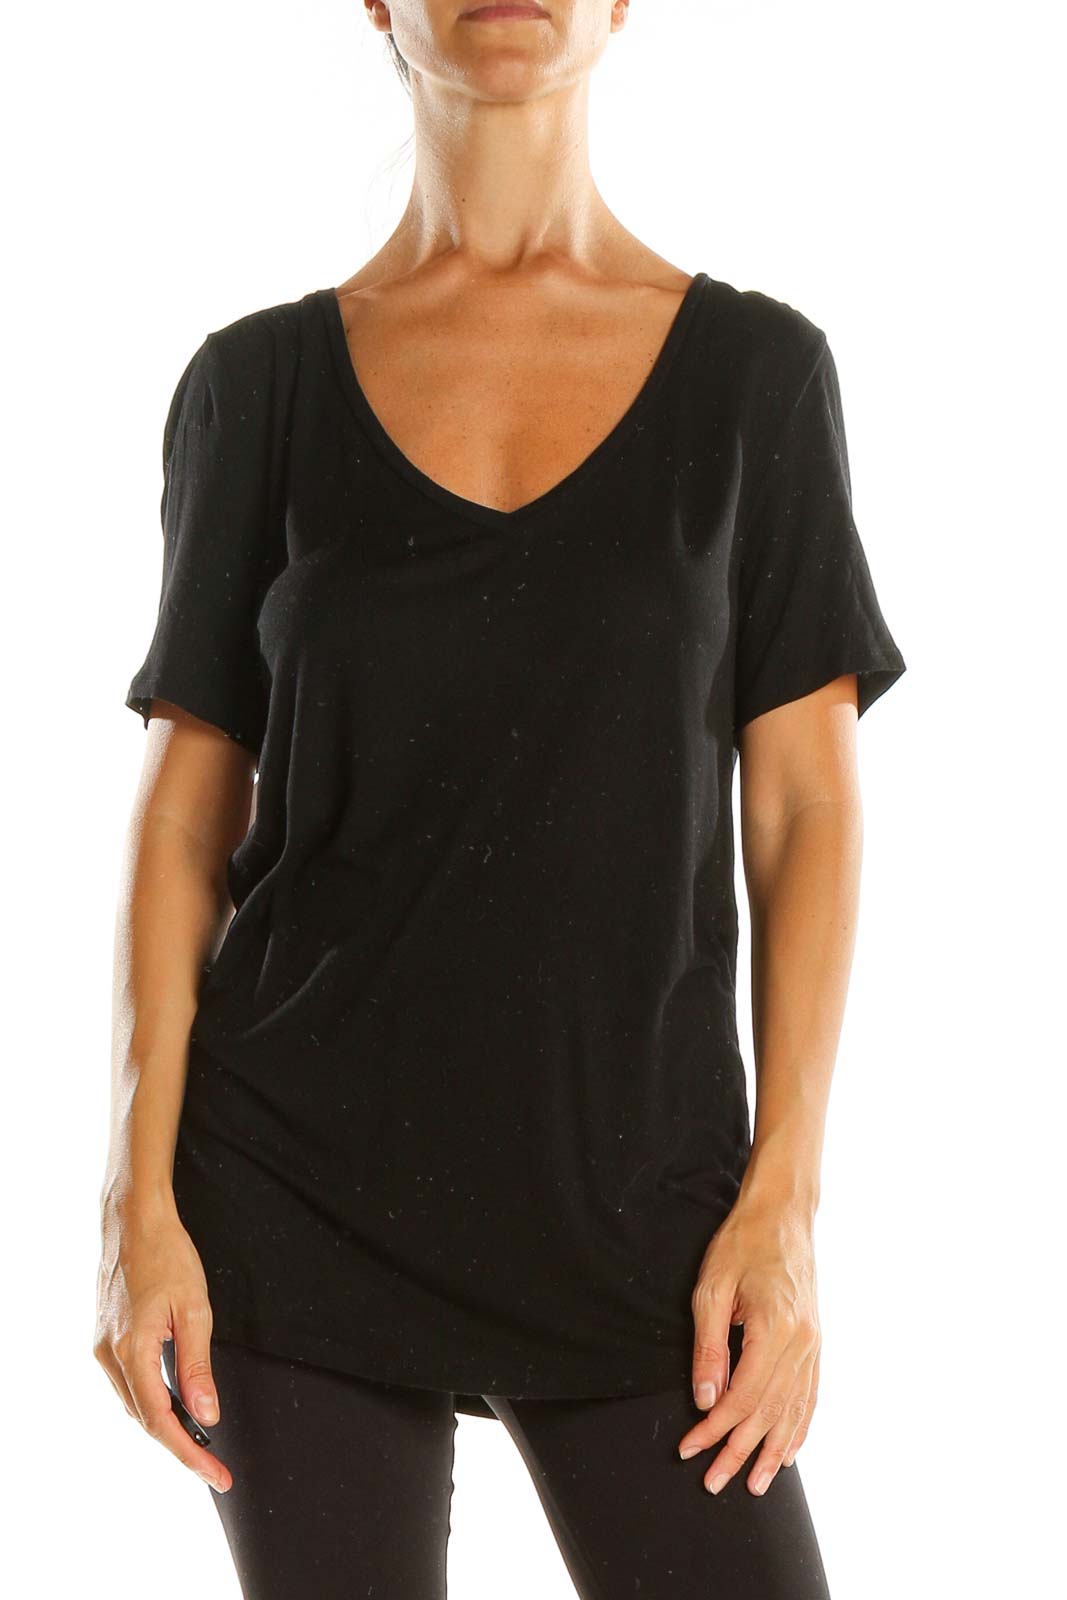 Black All Day Wear T-Shirt Front